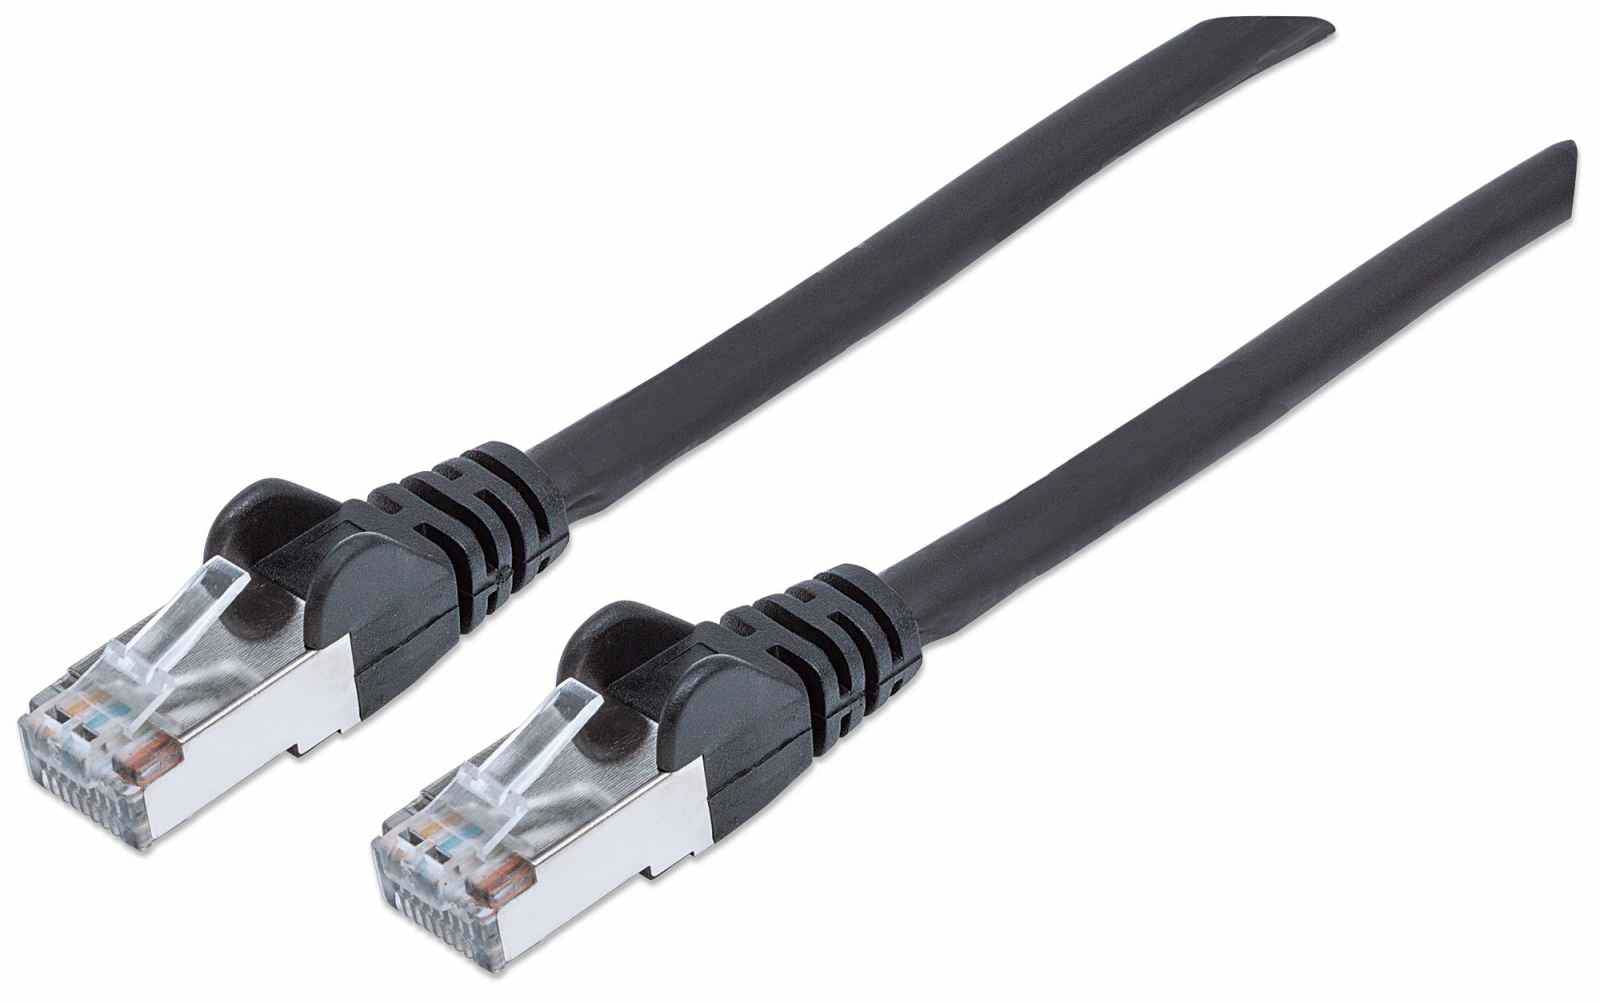 Intellinet Network Patch Cable, Cat7 Cable/Cat6A Plugs, 5m, Black, Copper, S/FTP, LSOH / LSZH, PVC, RJ45, Gold Plated Contacts, Snagless, Booted, Lifetime Warranty, Polybag